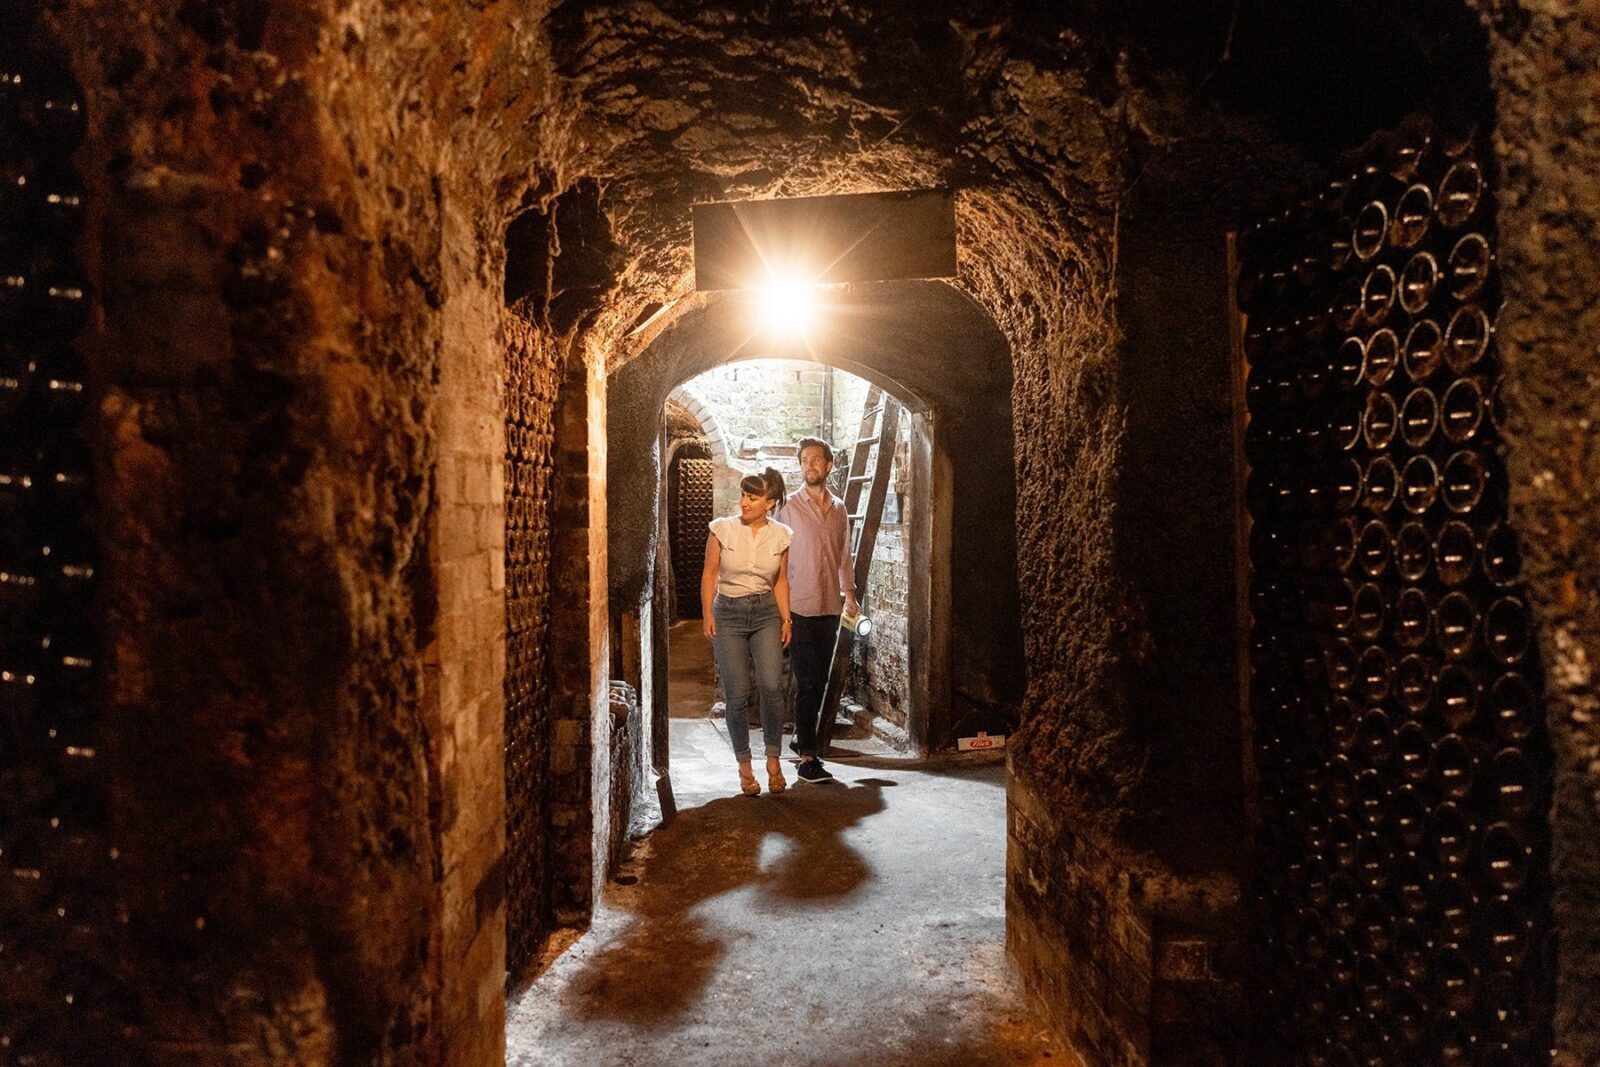 A man and a woman exploring the underground cellars